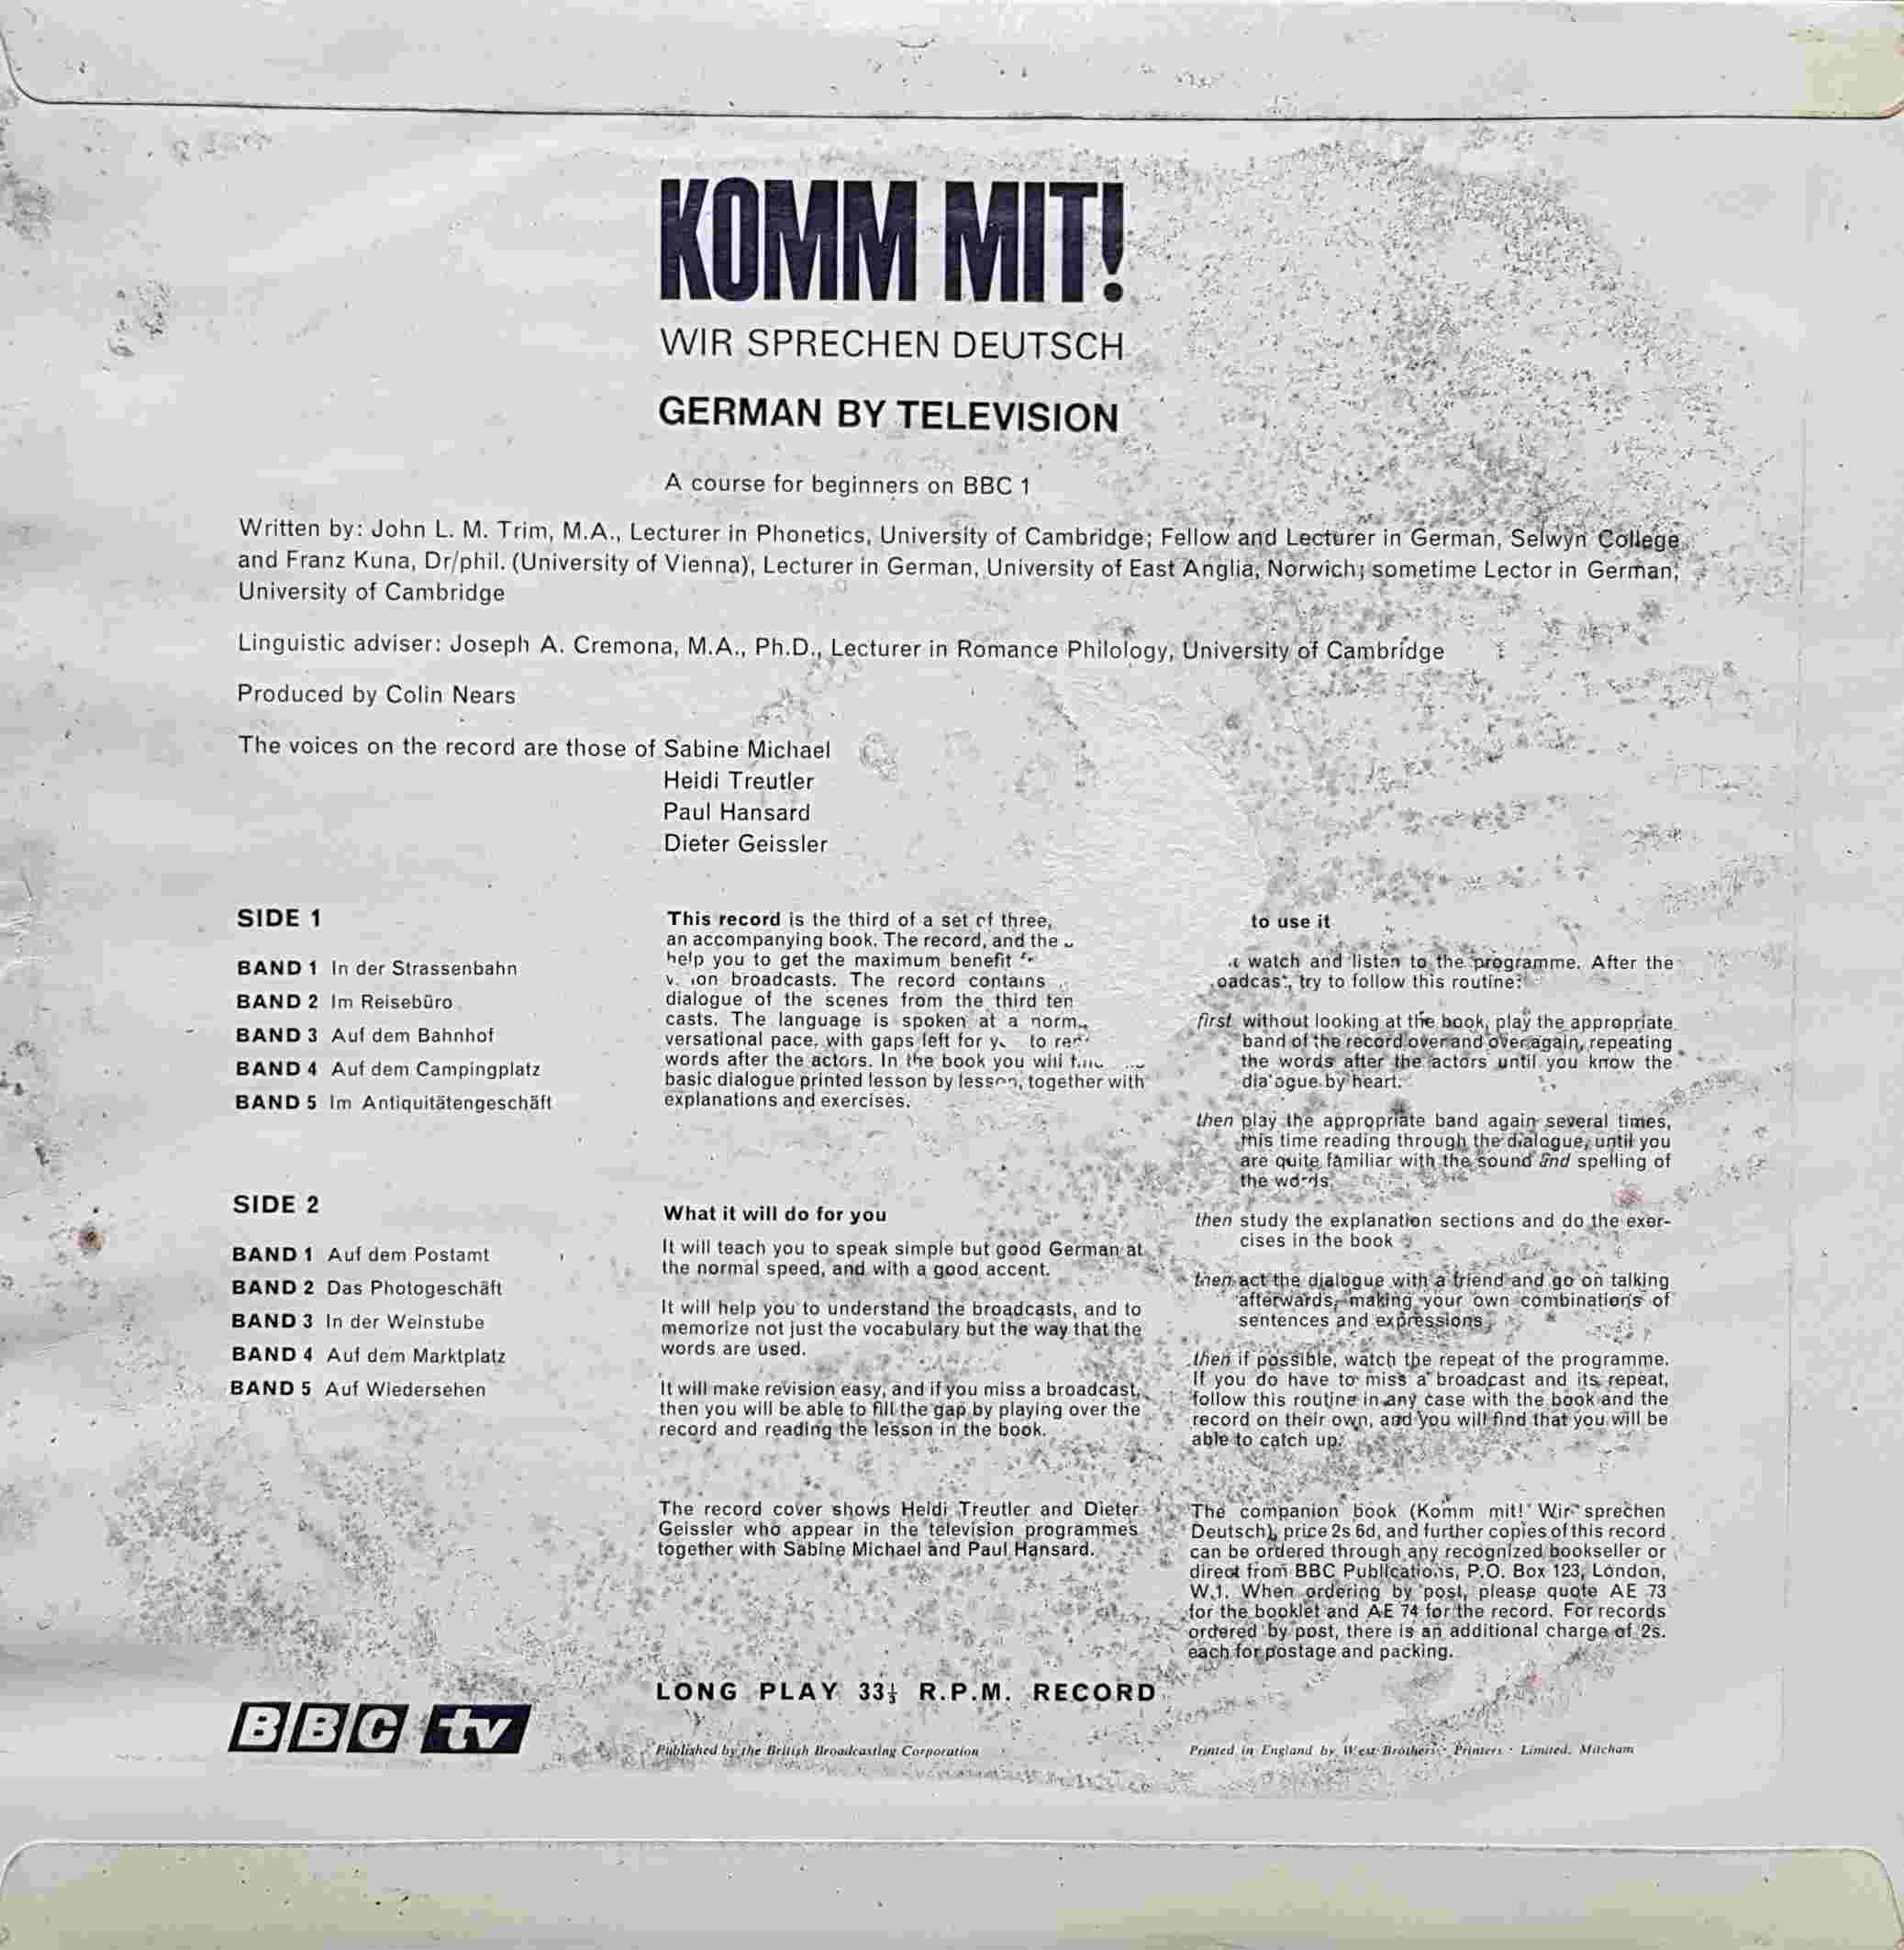 Picture of OP 13/14 Komm mit! Wir sprechen Deutsch - A BBC course for beginners lessons 21 - 30 by artist John L. M. Trim / Frank Kuna from the BBC records and Tapes library